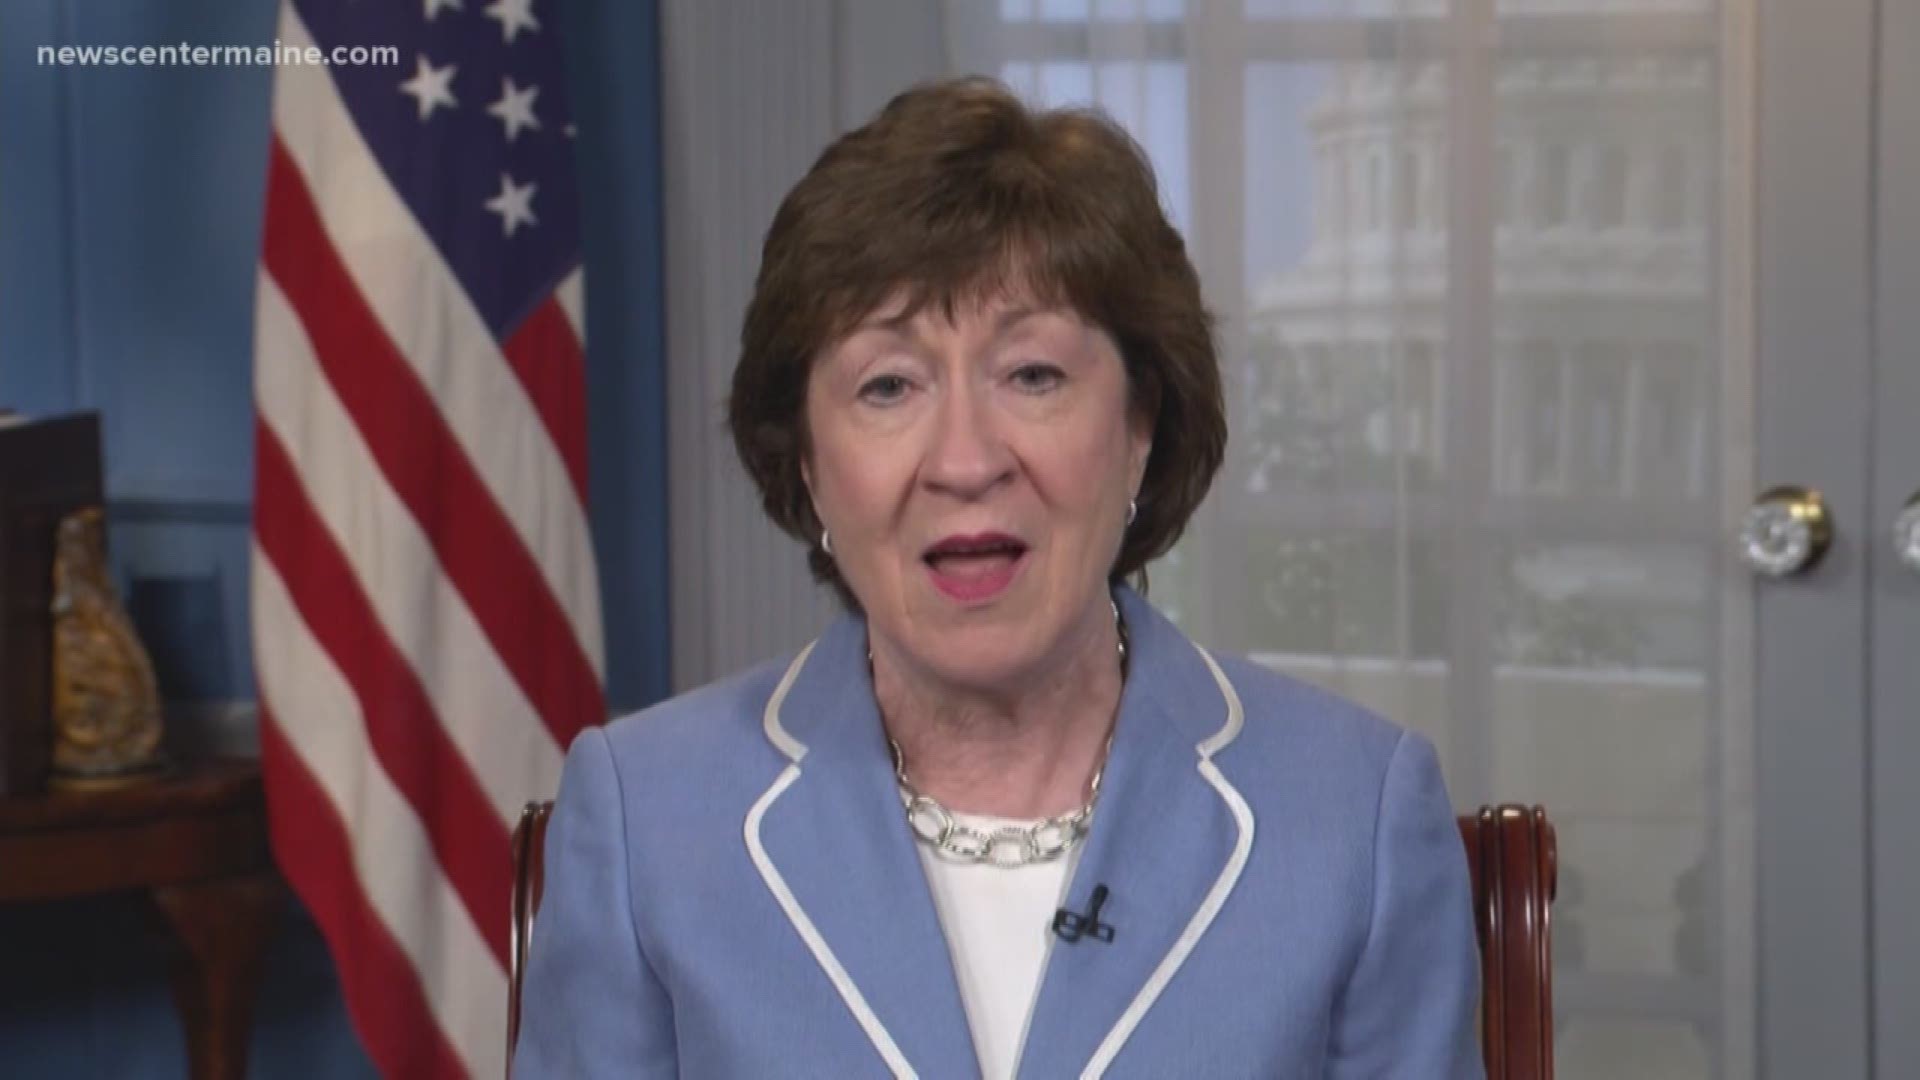 After the release of a new book Tuesday, July 9, Sen. Susan Collins is standing behind her decision to confirm Supreme Court Justice Brett Kavanaugh.